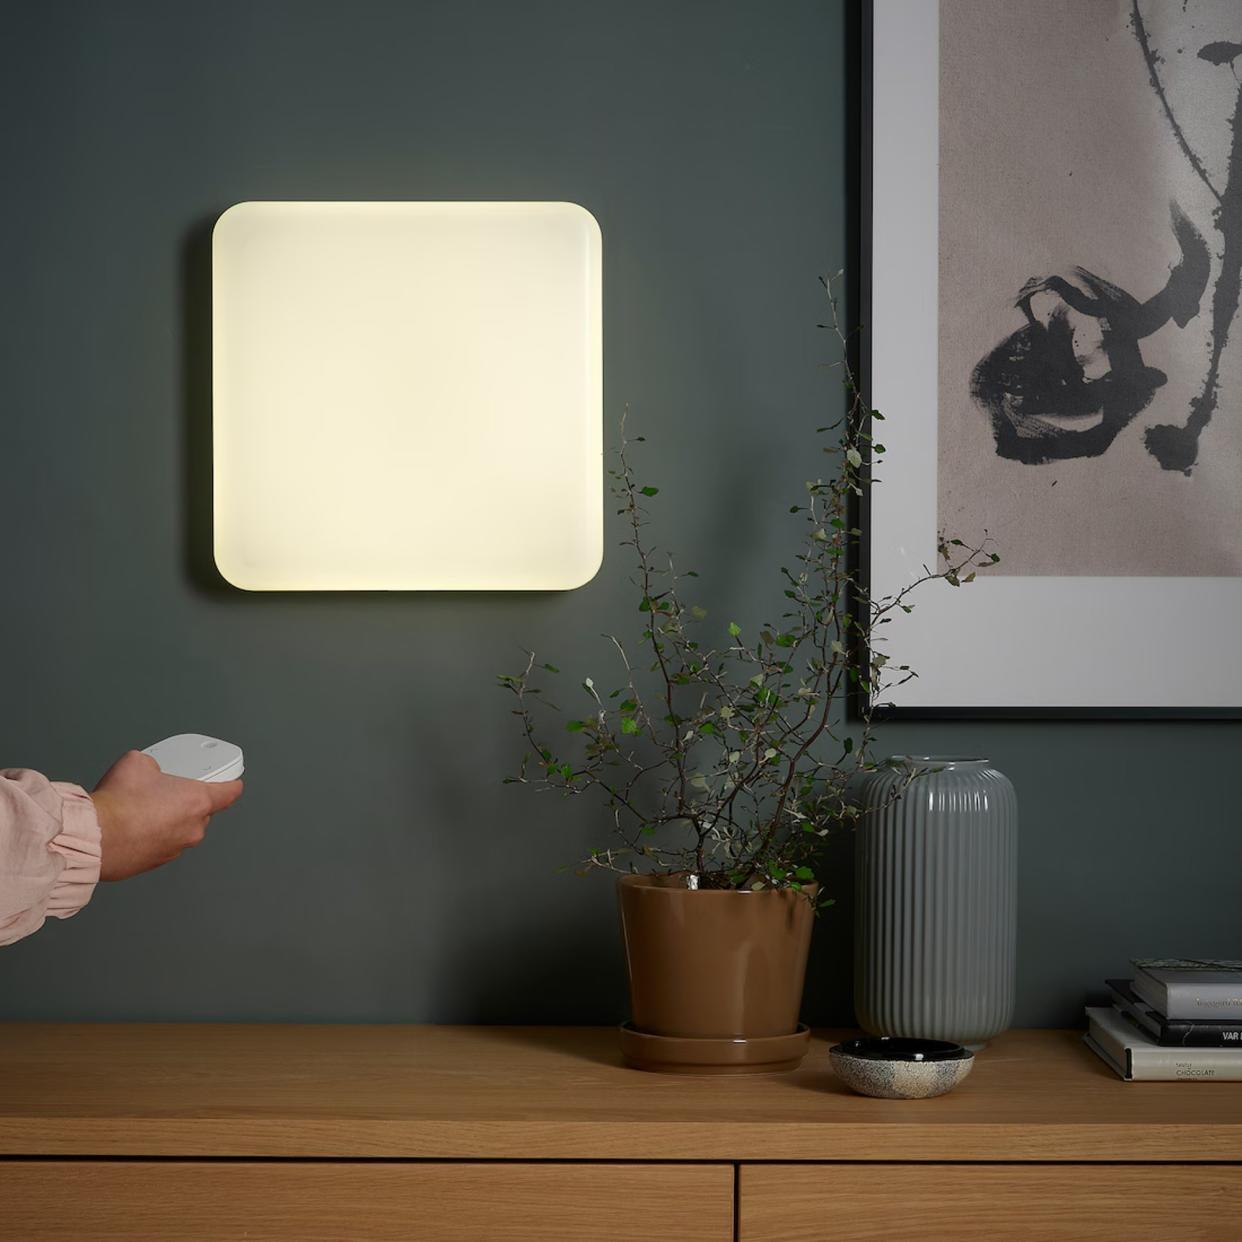  IKEA JETSTRÖM LED wall light panel on a wall, someone turning it on using a remote control. 